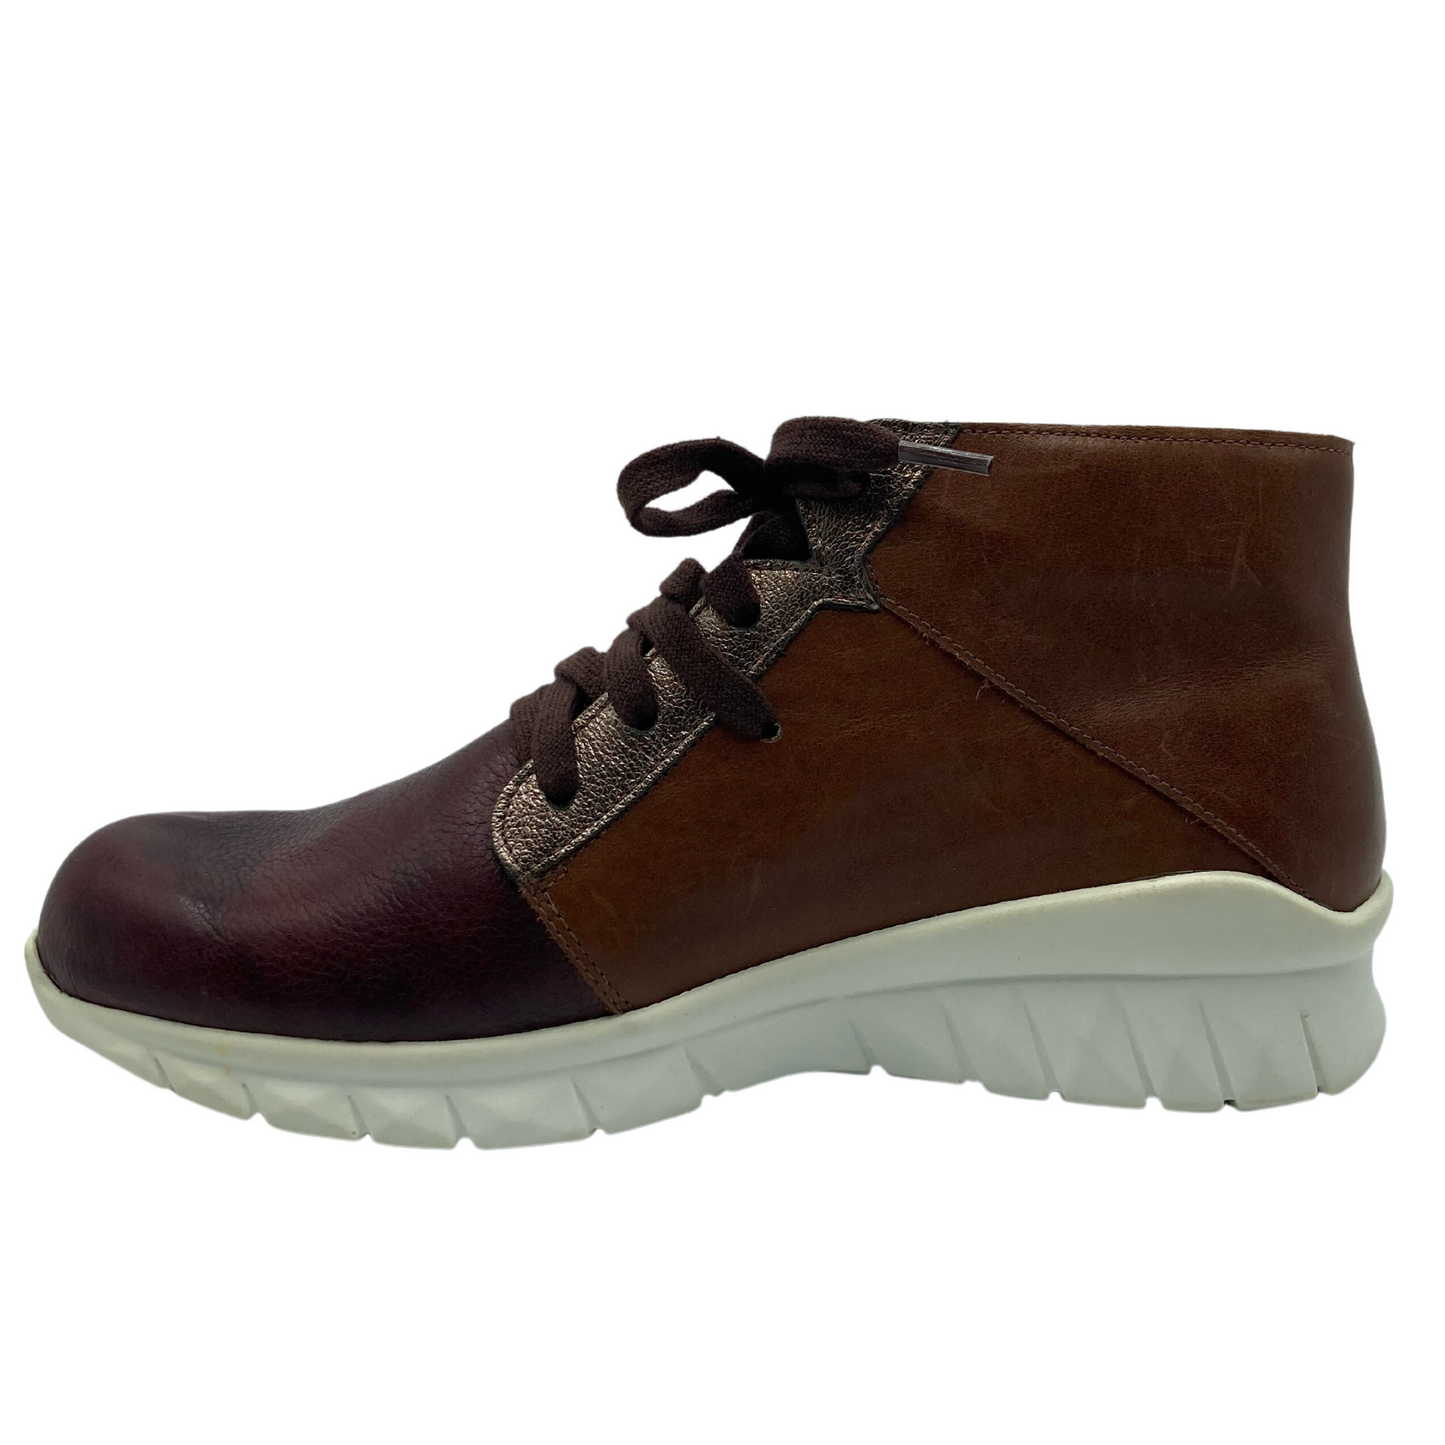 Left facing view of brown leather, ankle height sneaker with white sole and brown laces